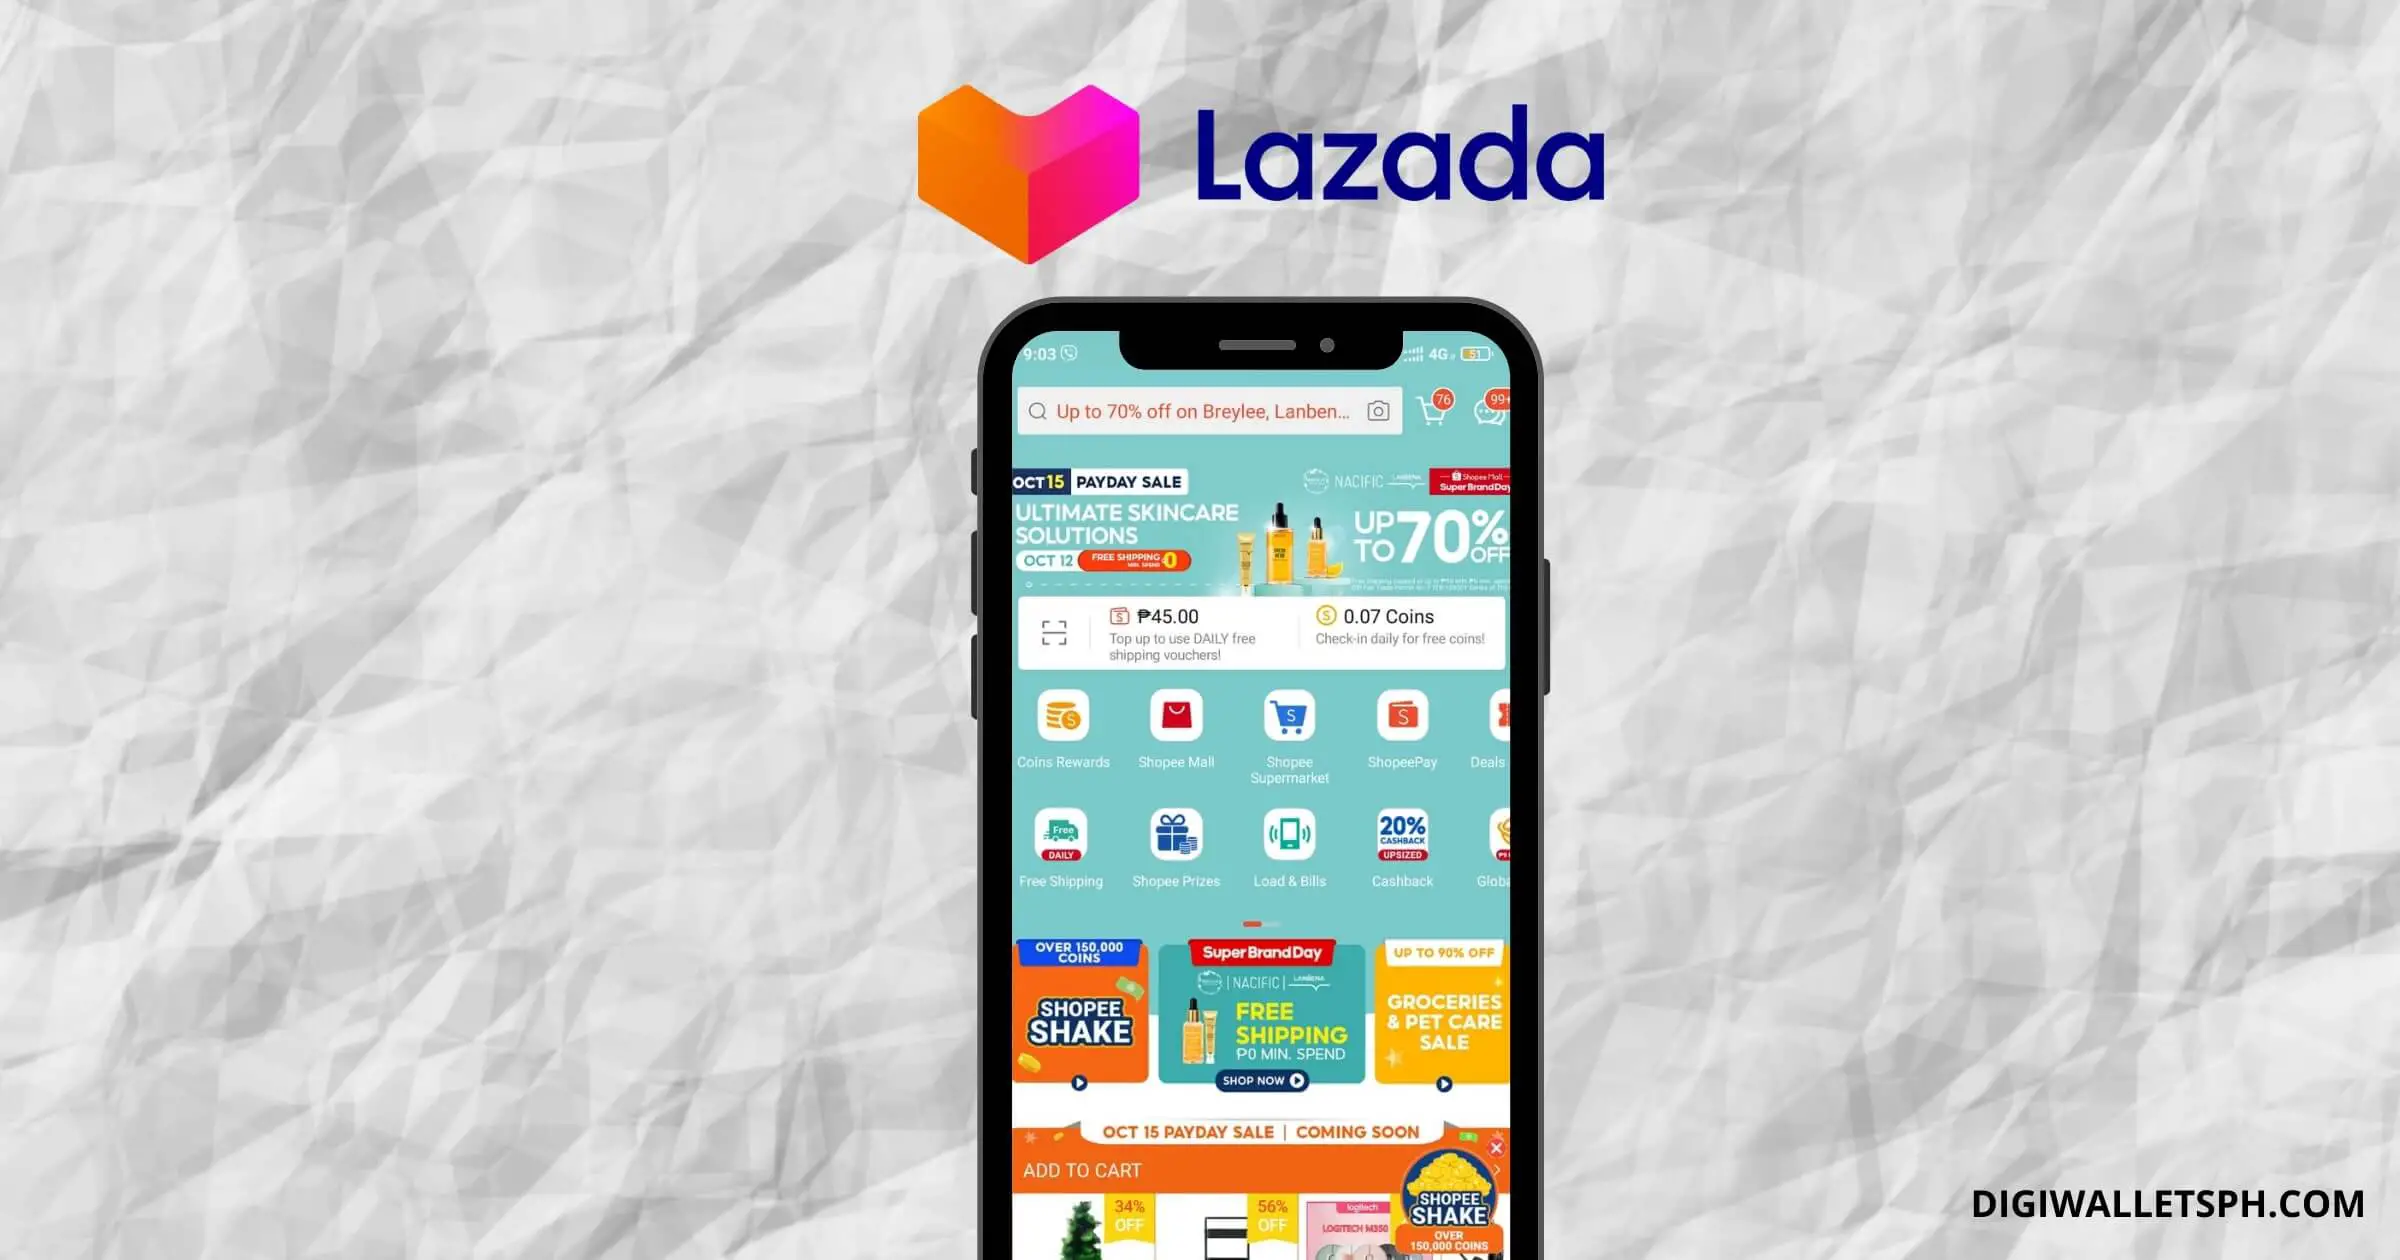 How to order in Lazada